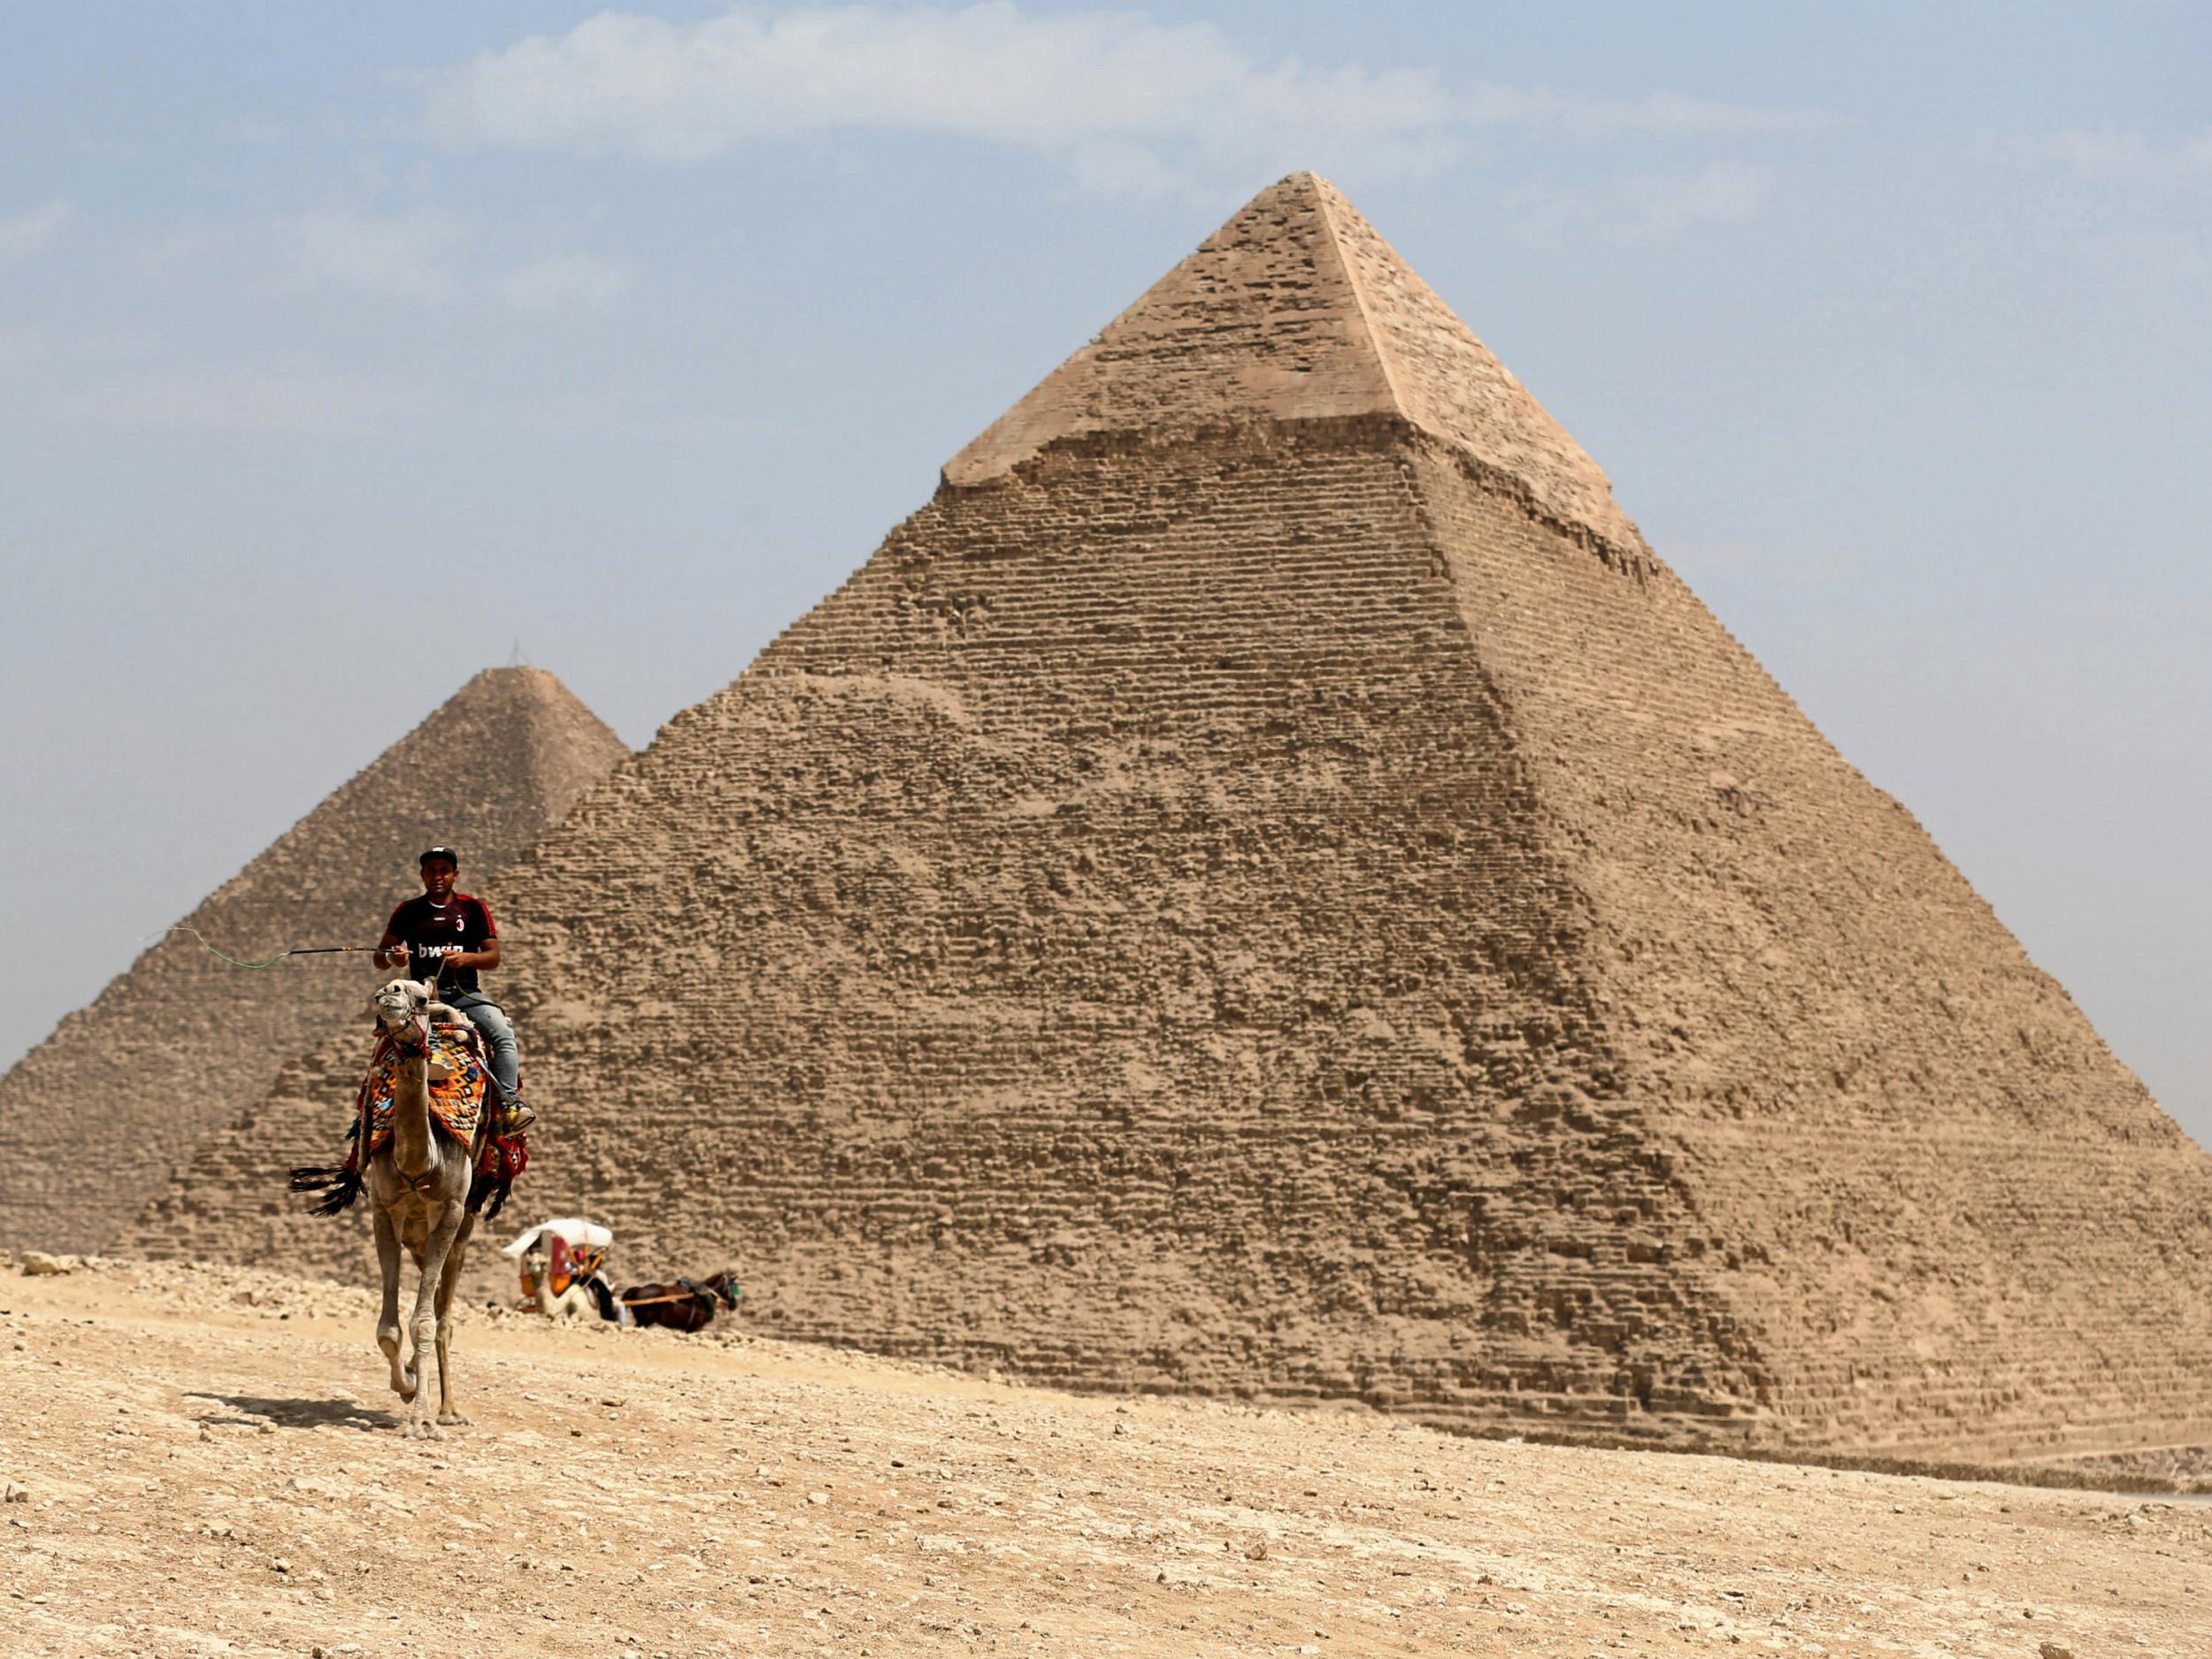 The Great Giza pyramids on the outskirts of Cairo